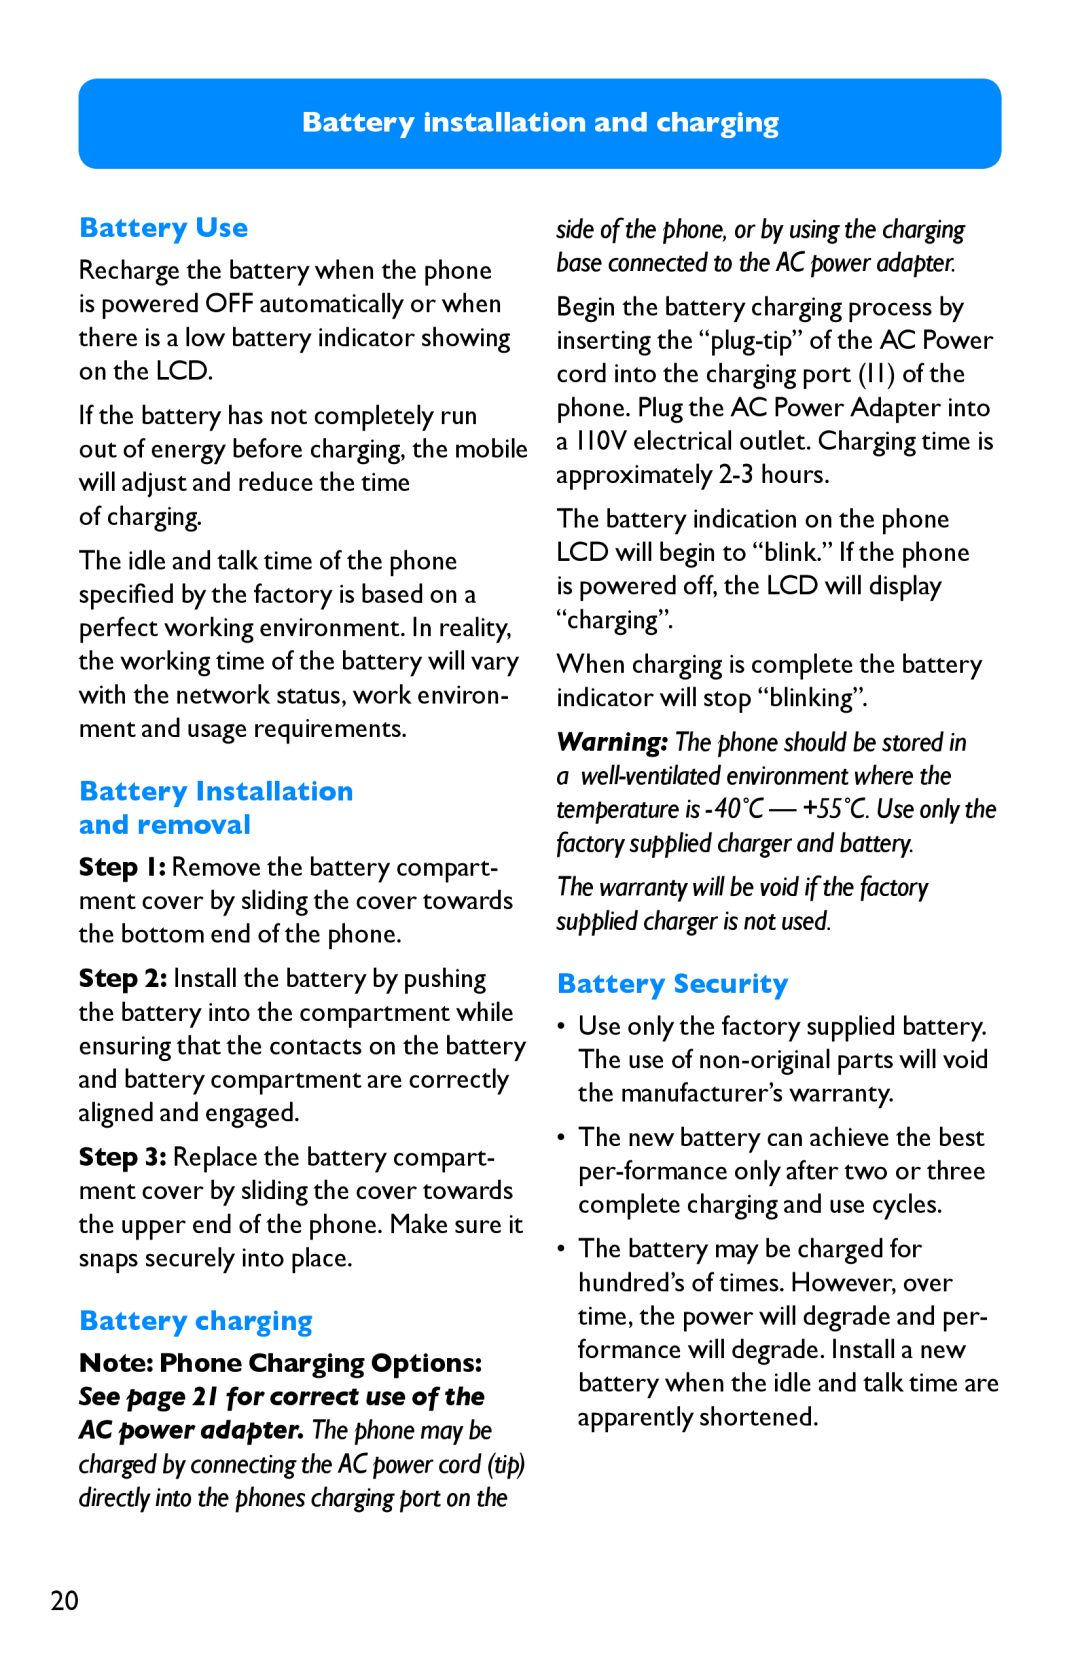 Clarity Pal manual Battery installation and charging, Battery Use, of charging, Battery Installation and removal 